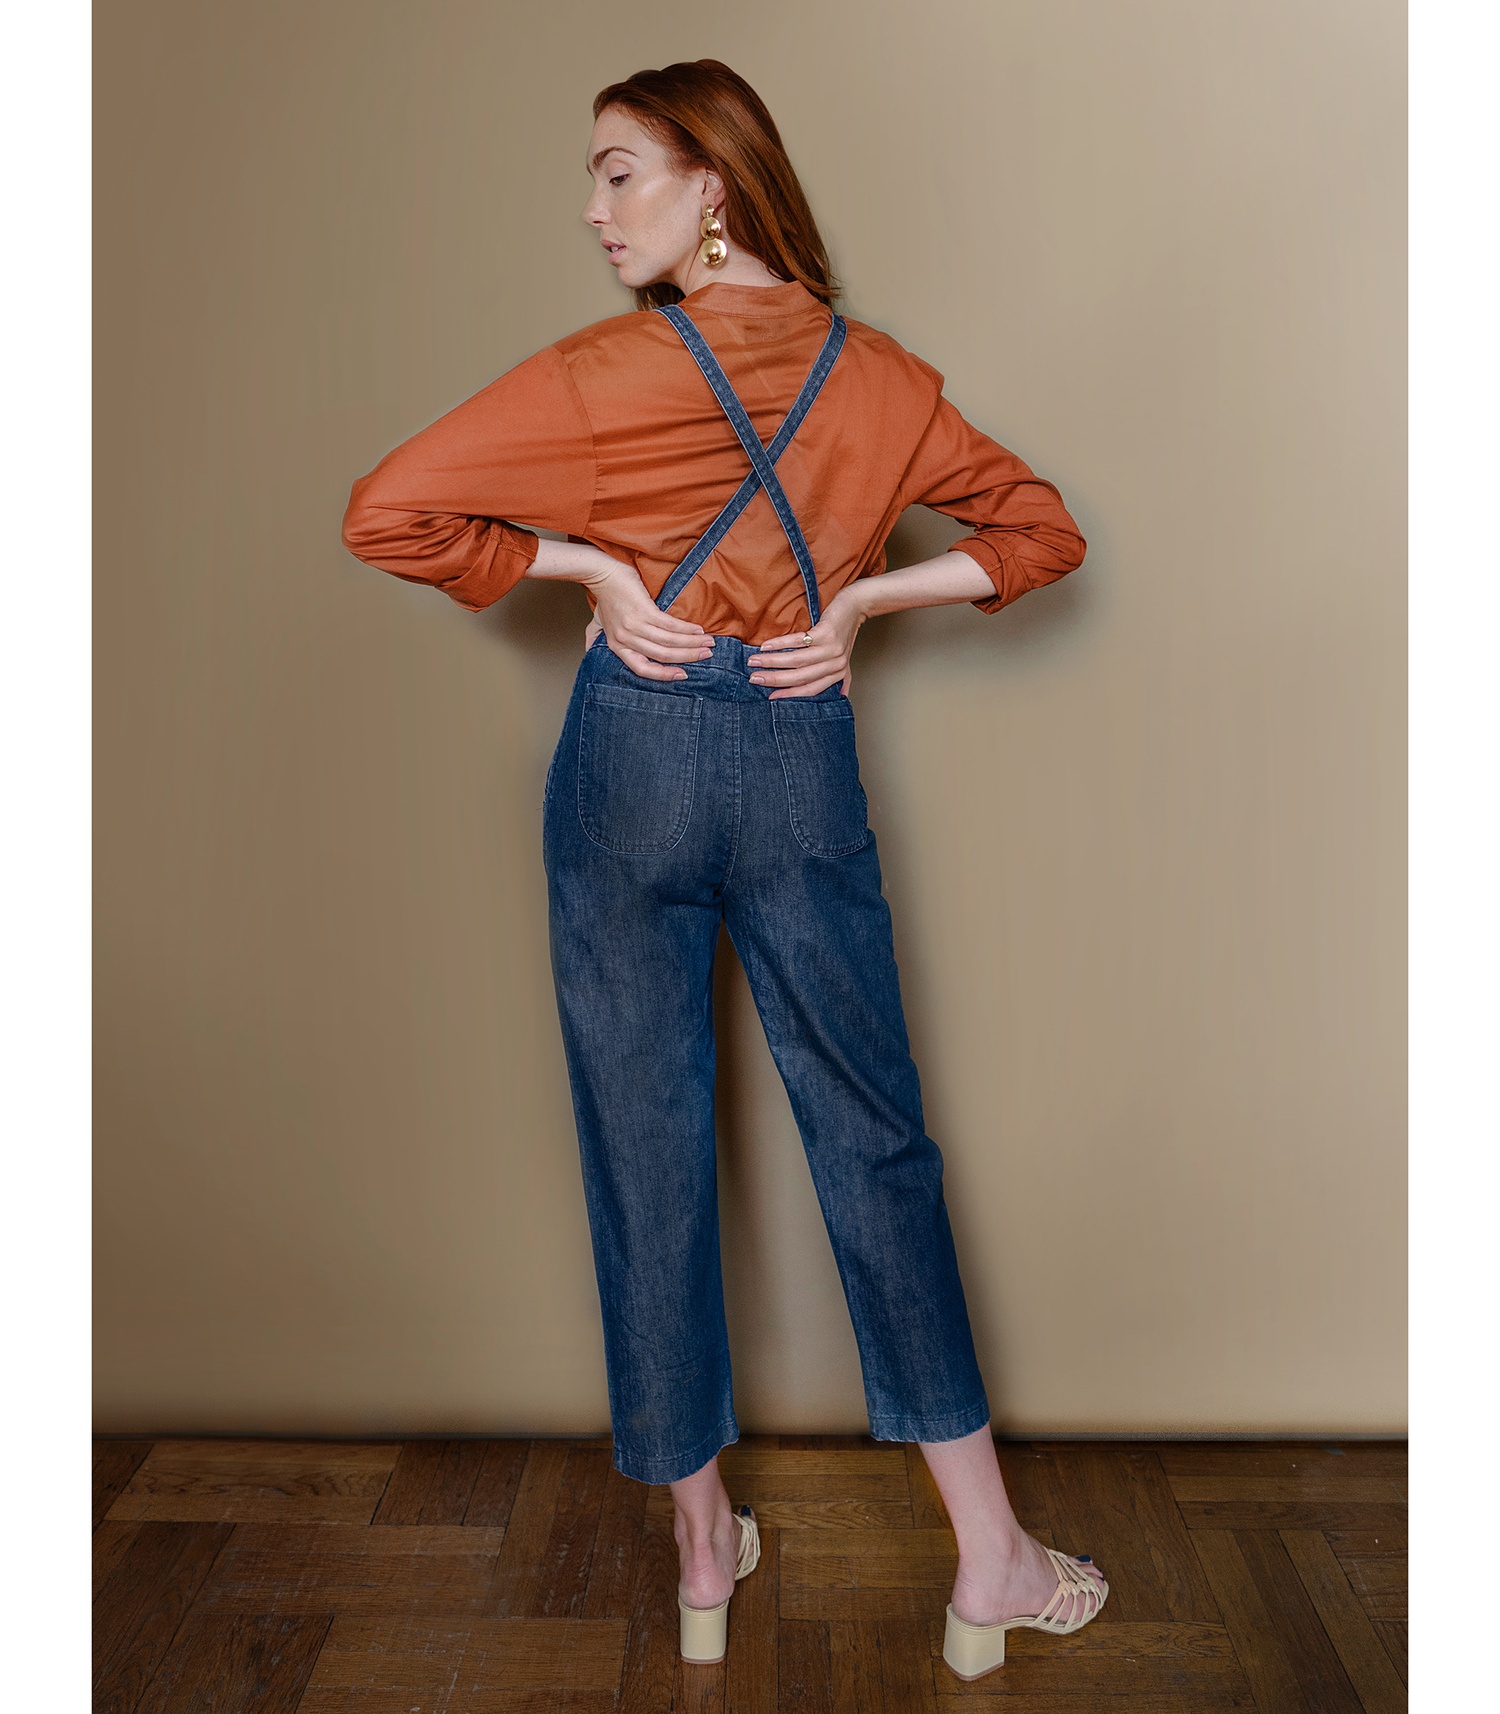 Model shows the back side of dark blue cropped overalls with thin adjustable straps and two front pockets over a long sleeve orange shirt. The Knot Overalls in Dark Indigo are designed by Loup and made in New York City, NY.